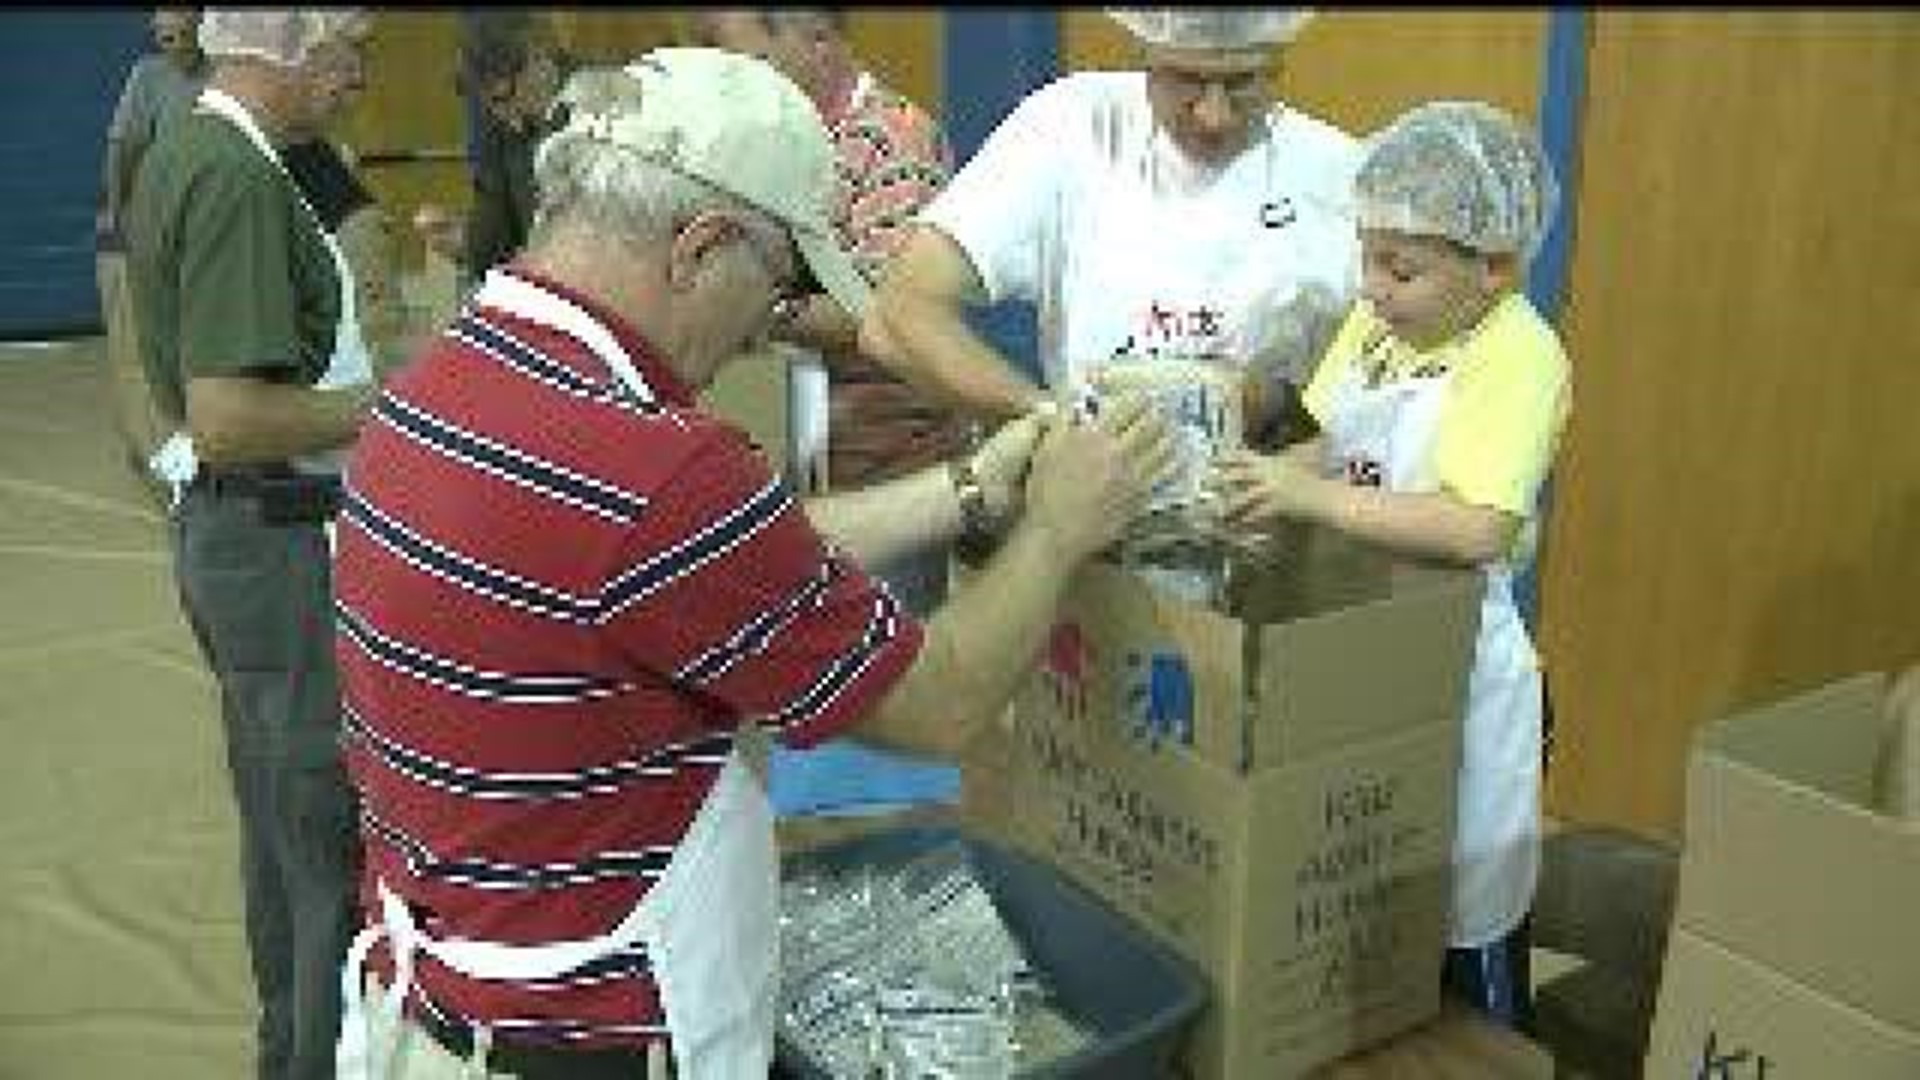 Congregations gather to feed the hungry